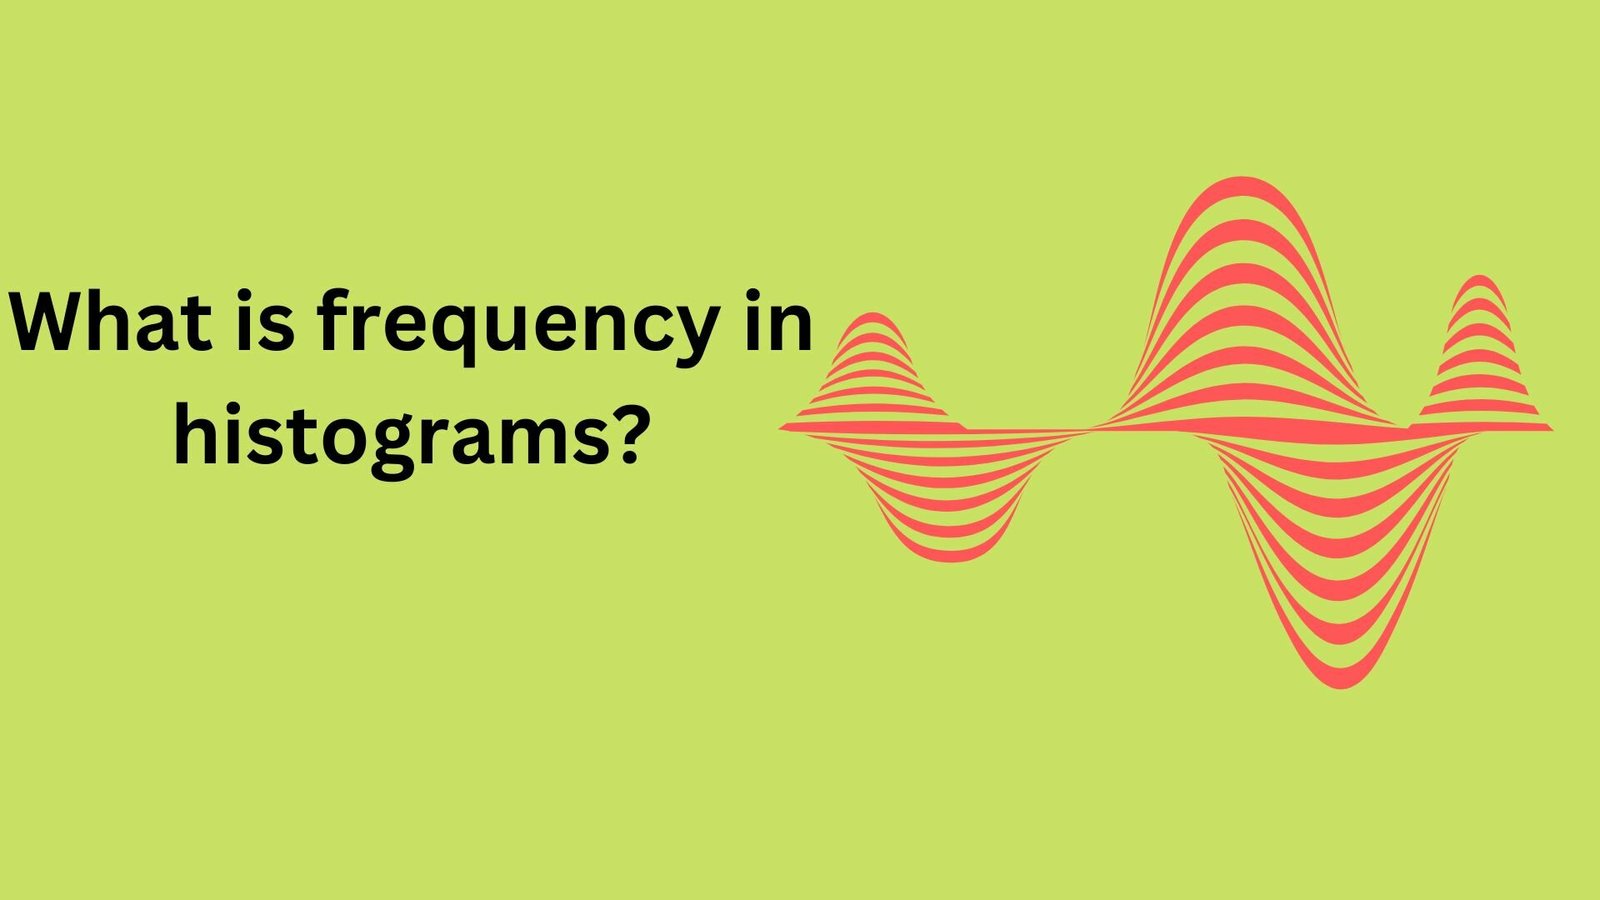 Histograms: What is frequency in histograms?